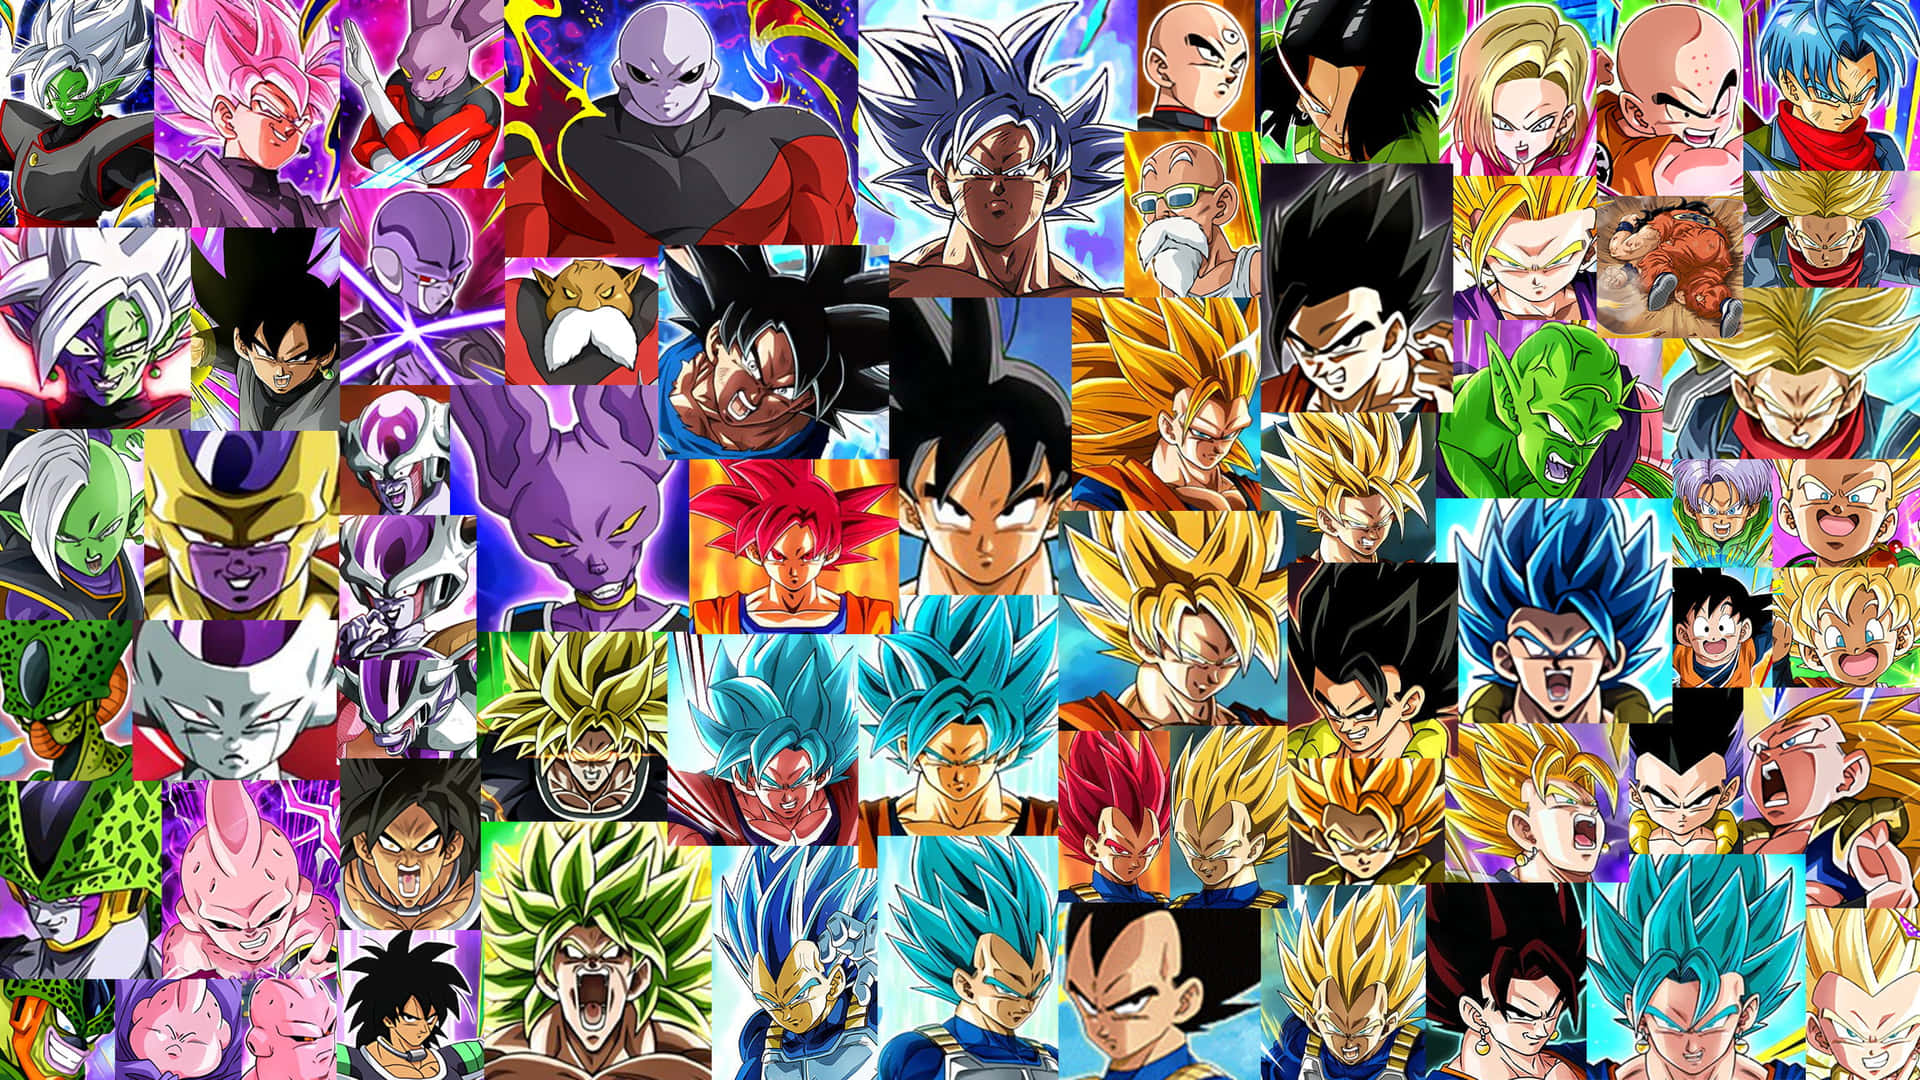 Epic Dragon Ball Z Character Collage Wallpaper